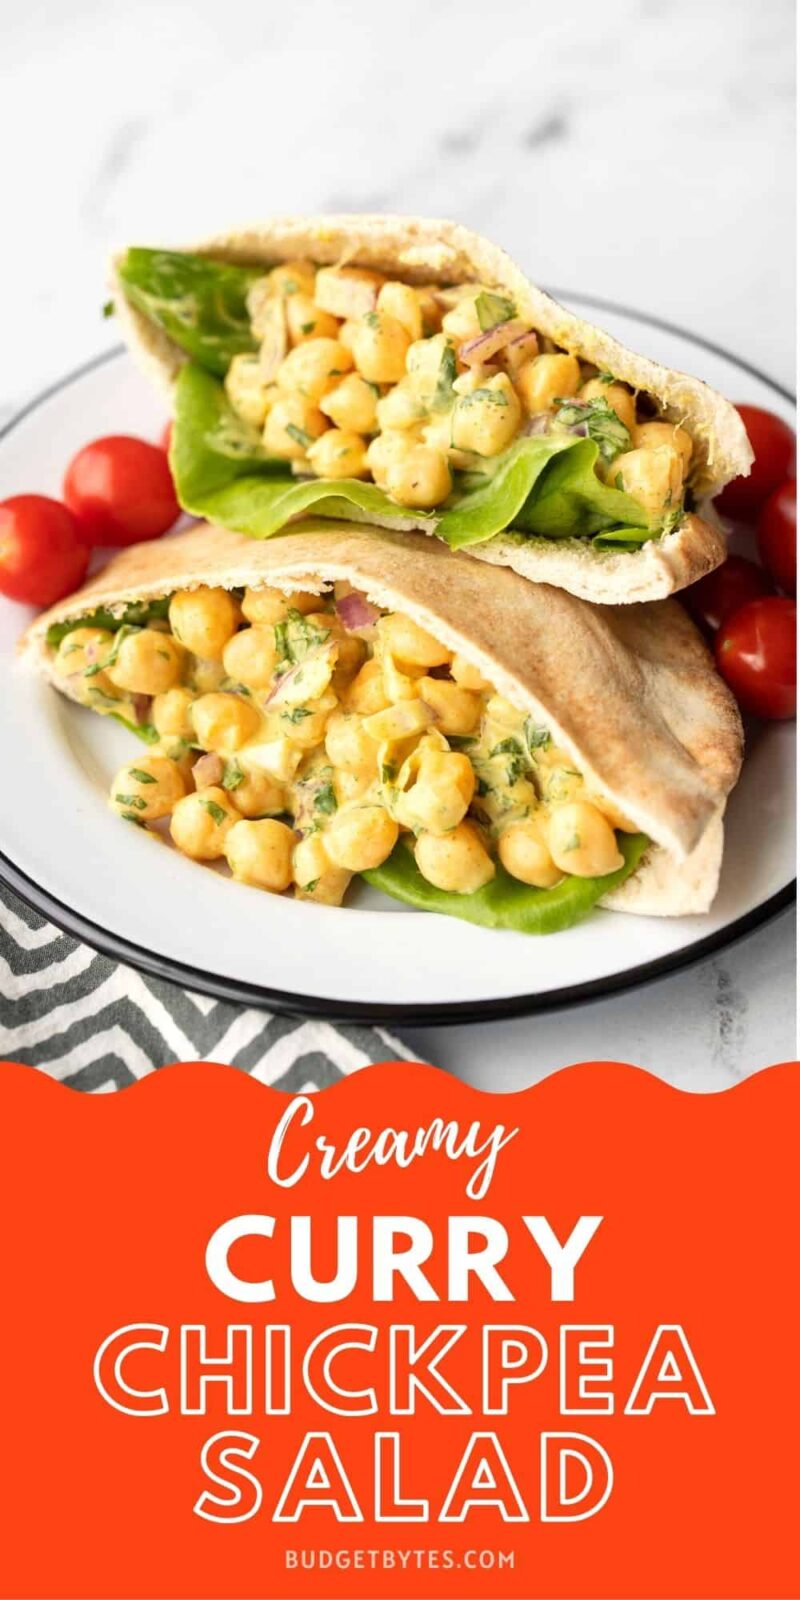 Curry Chickpea Salad in pitas, title text at the bottom in red